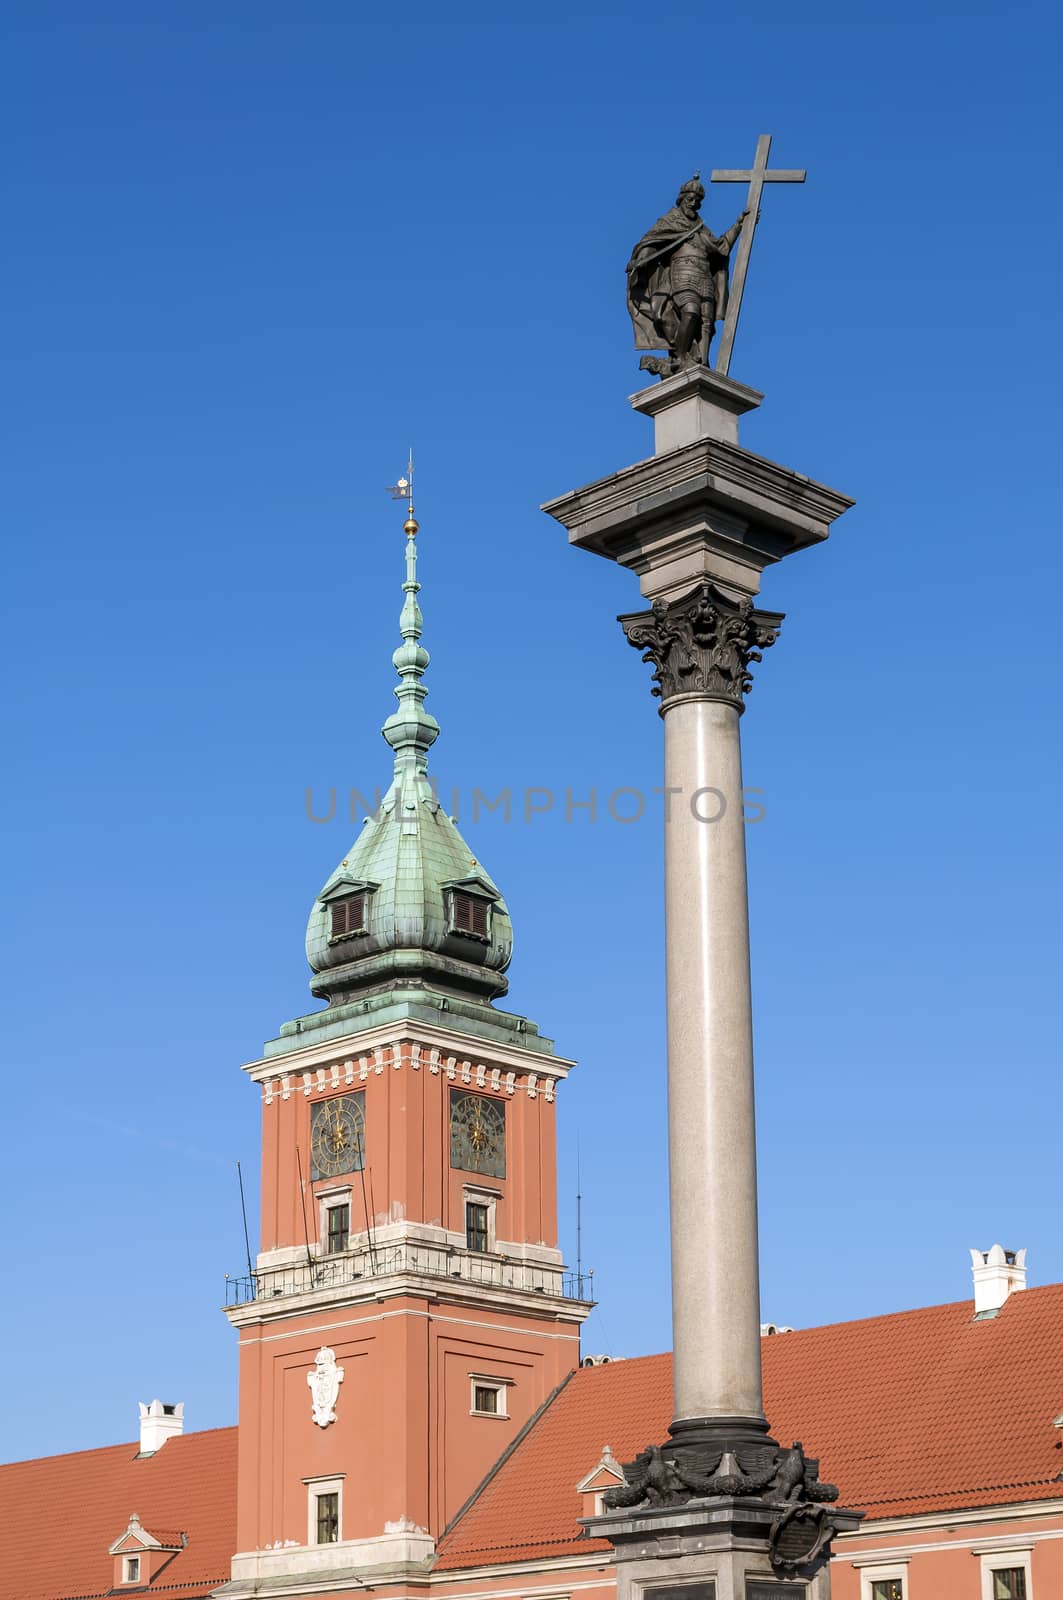 Royal Castle and statue of Zygmunt III Vasa at the top of the Zygmunt's column in Warsaw, 
Poland.